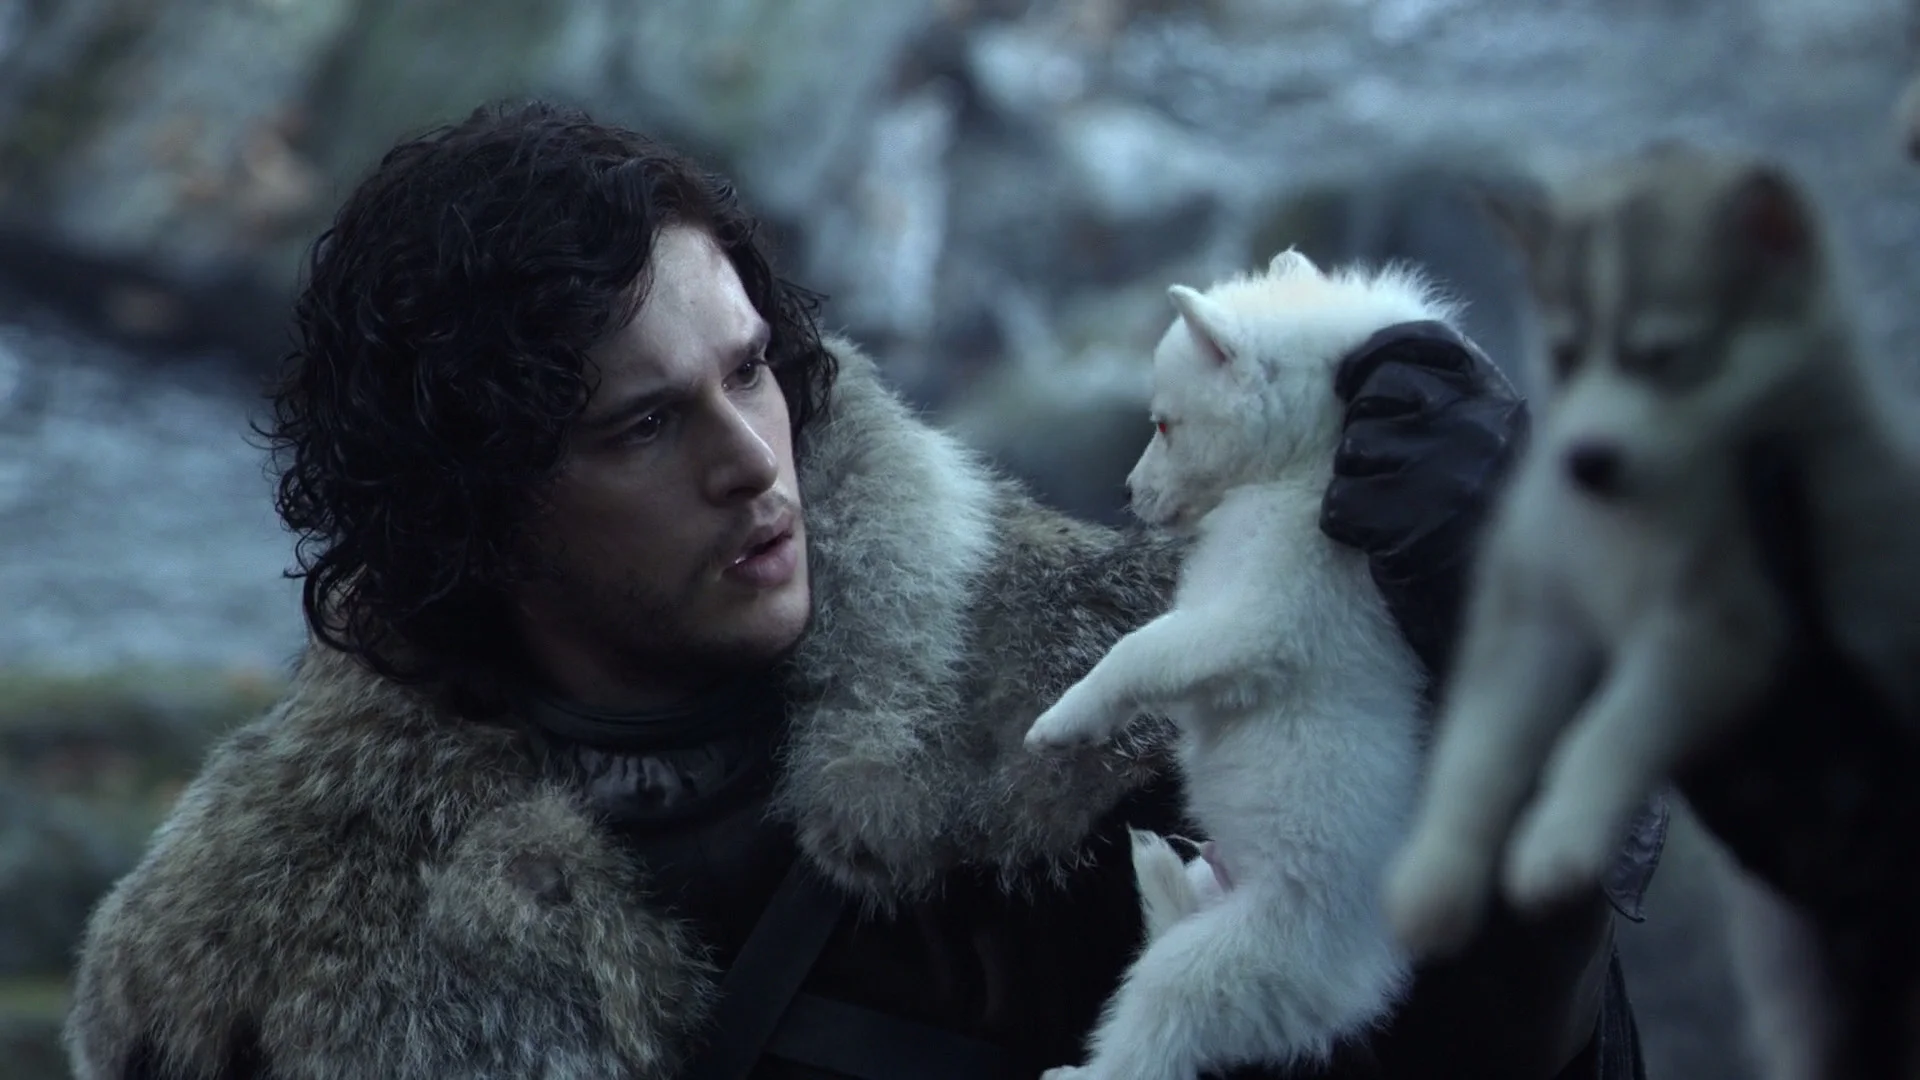 Jon Snow finds Ghost as a pup